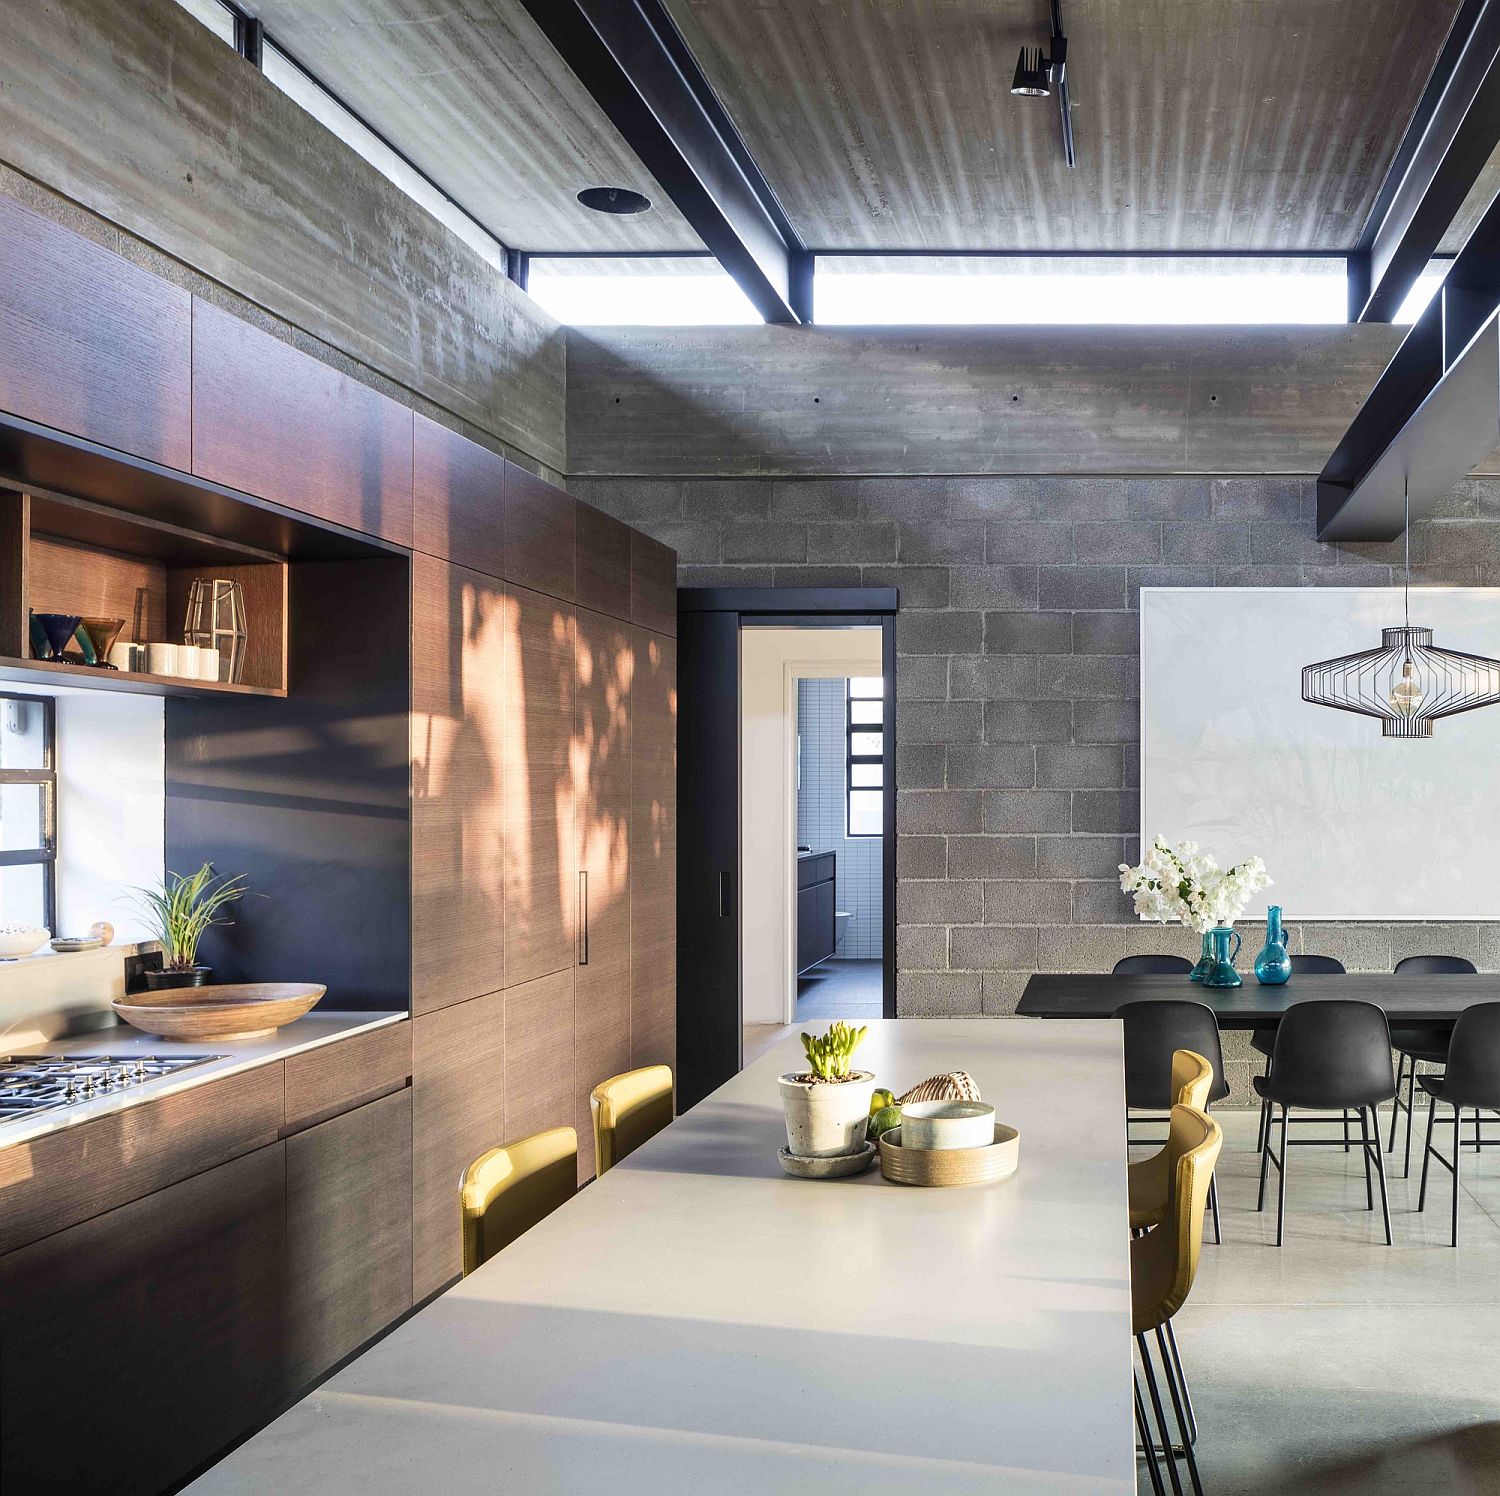 High ceiling and hovering concrete roof give the interior a spacious appeal